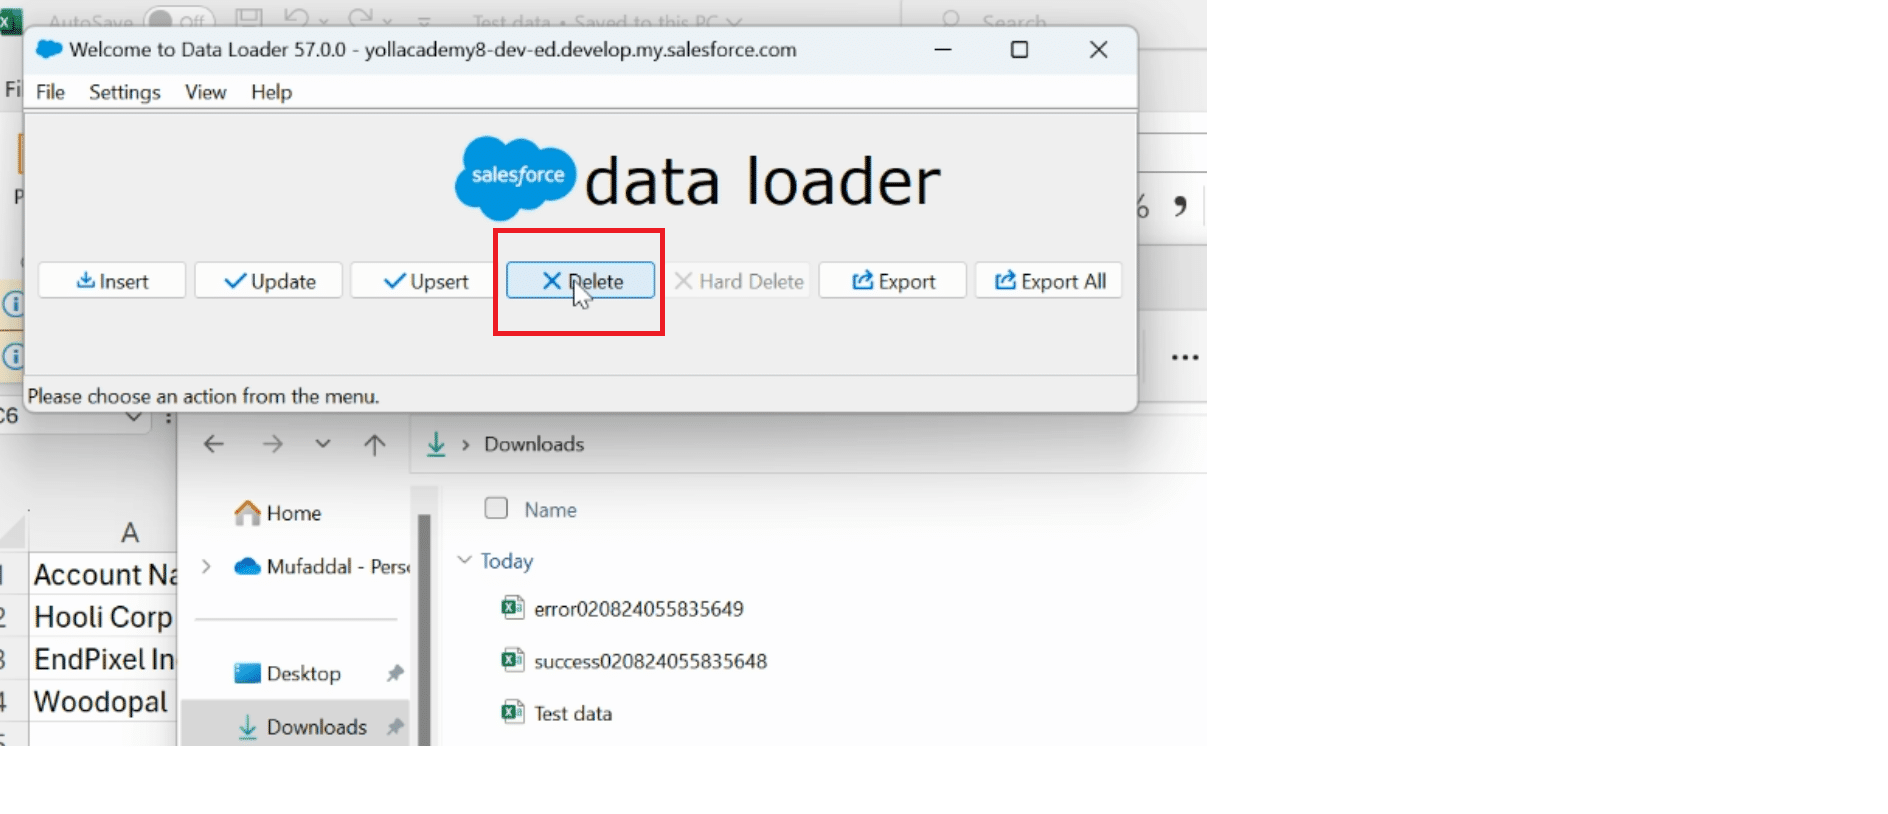  Locating the success file in the Downloads folder generated by Salesforce Data Loader after import.